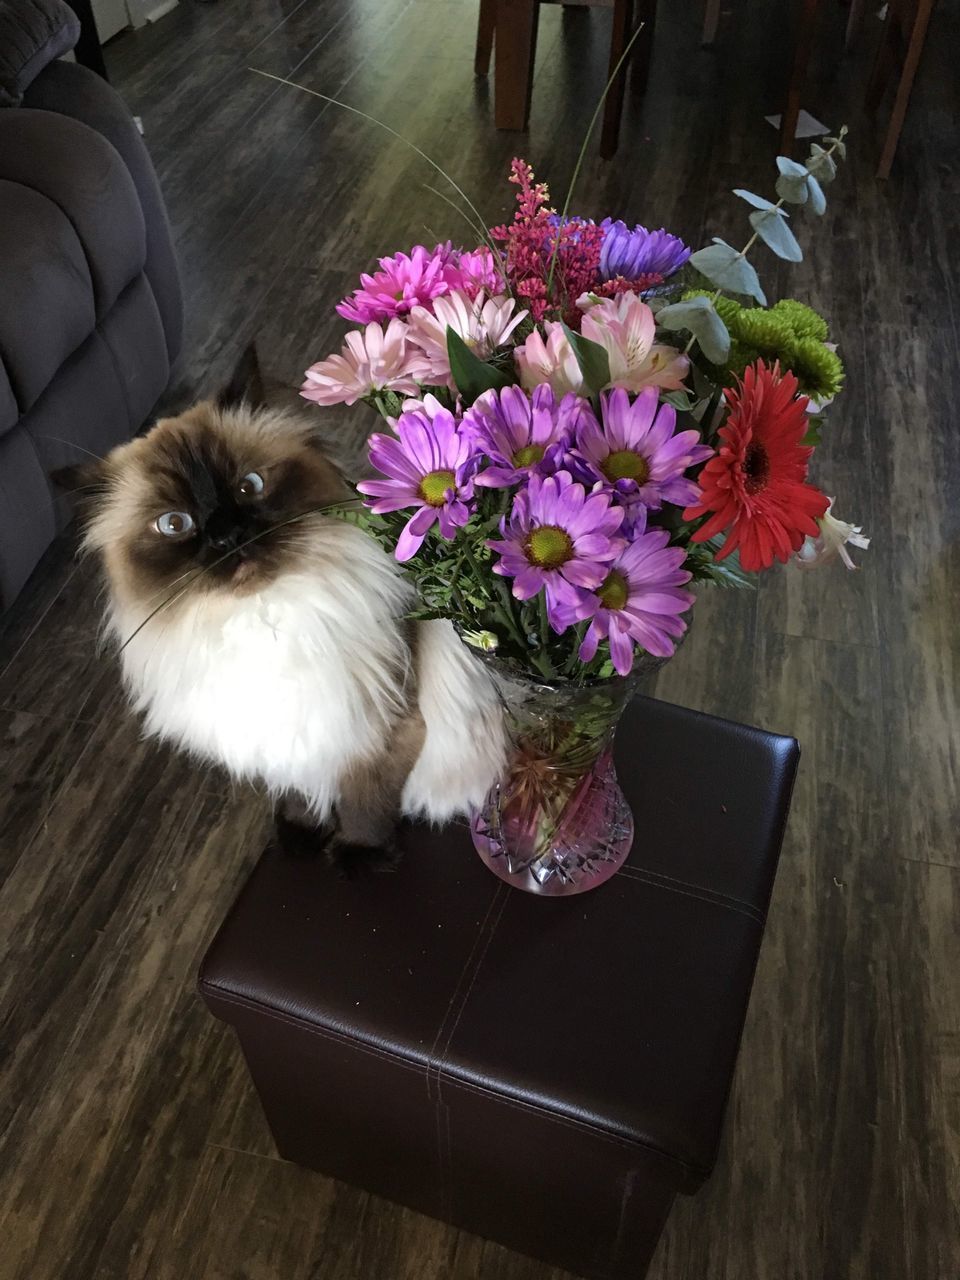 HIGH ANGLE VIEW OF CAT AMIDST FLOWER VASE